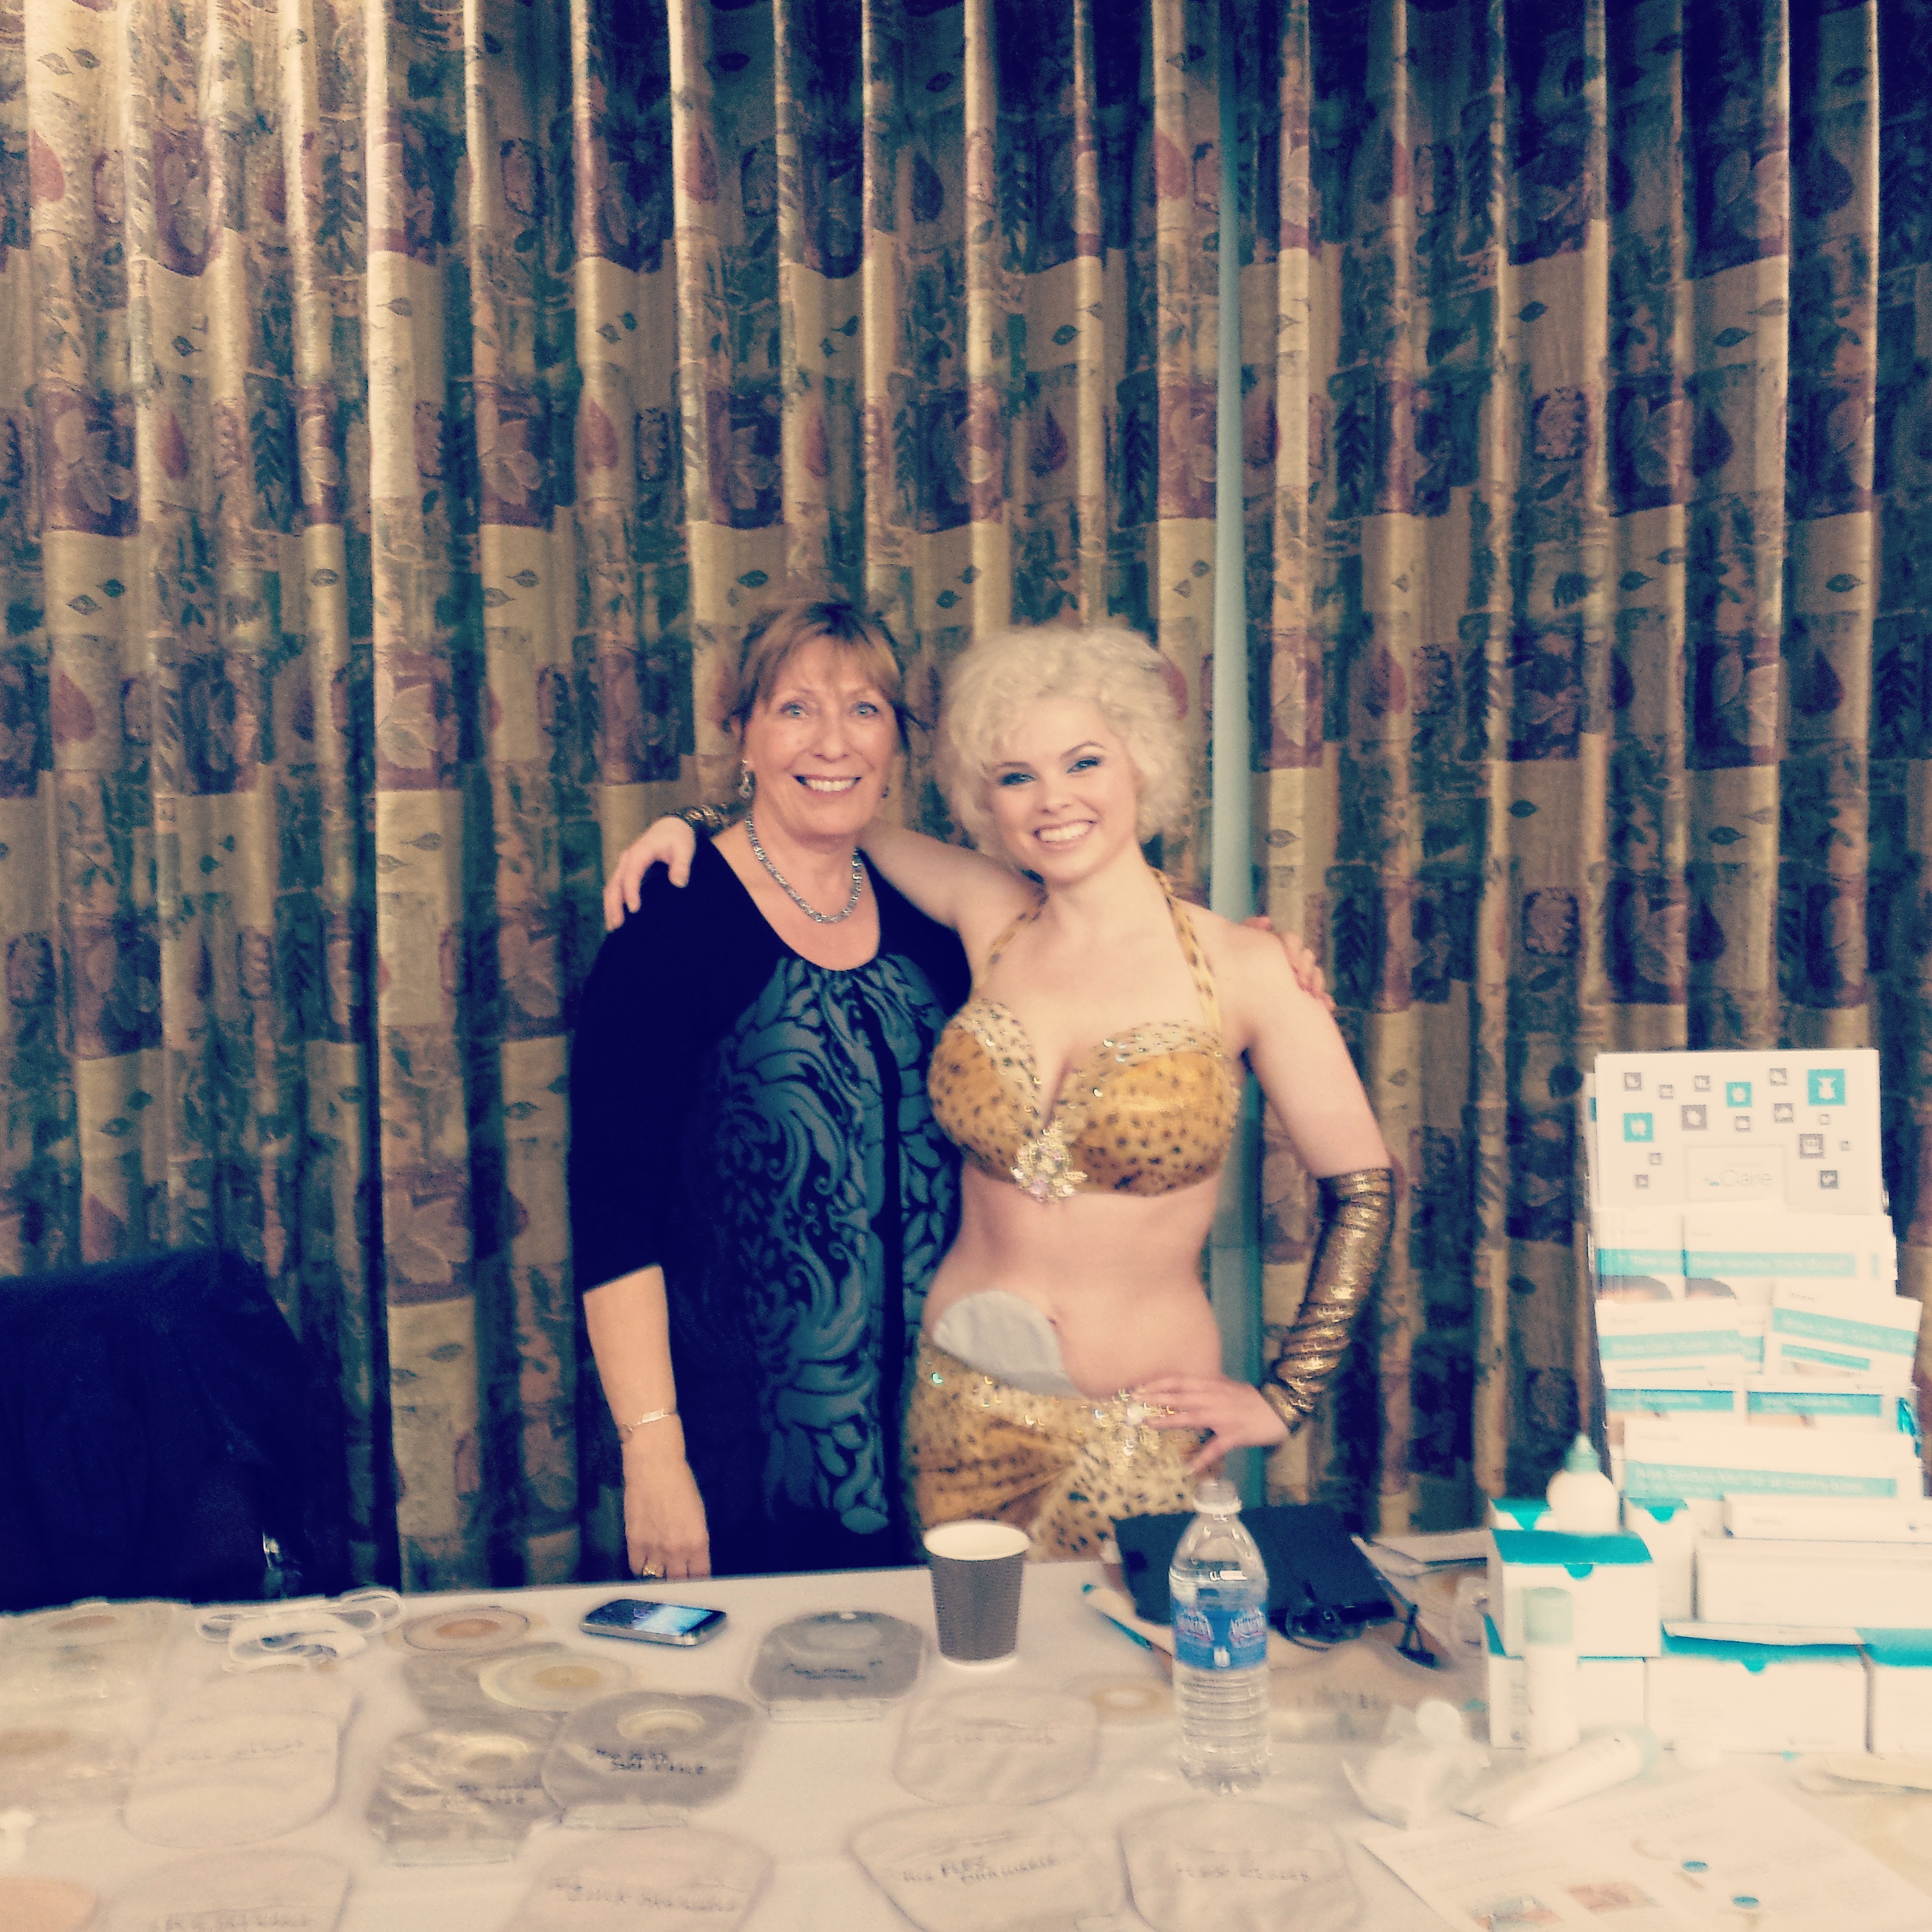 Margaret posing with a Coloplast rep at an ostomy education day, October 2014 in Nanaimo BC. Via @margaretsbelly instagram.